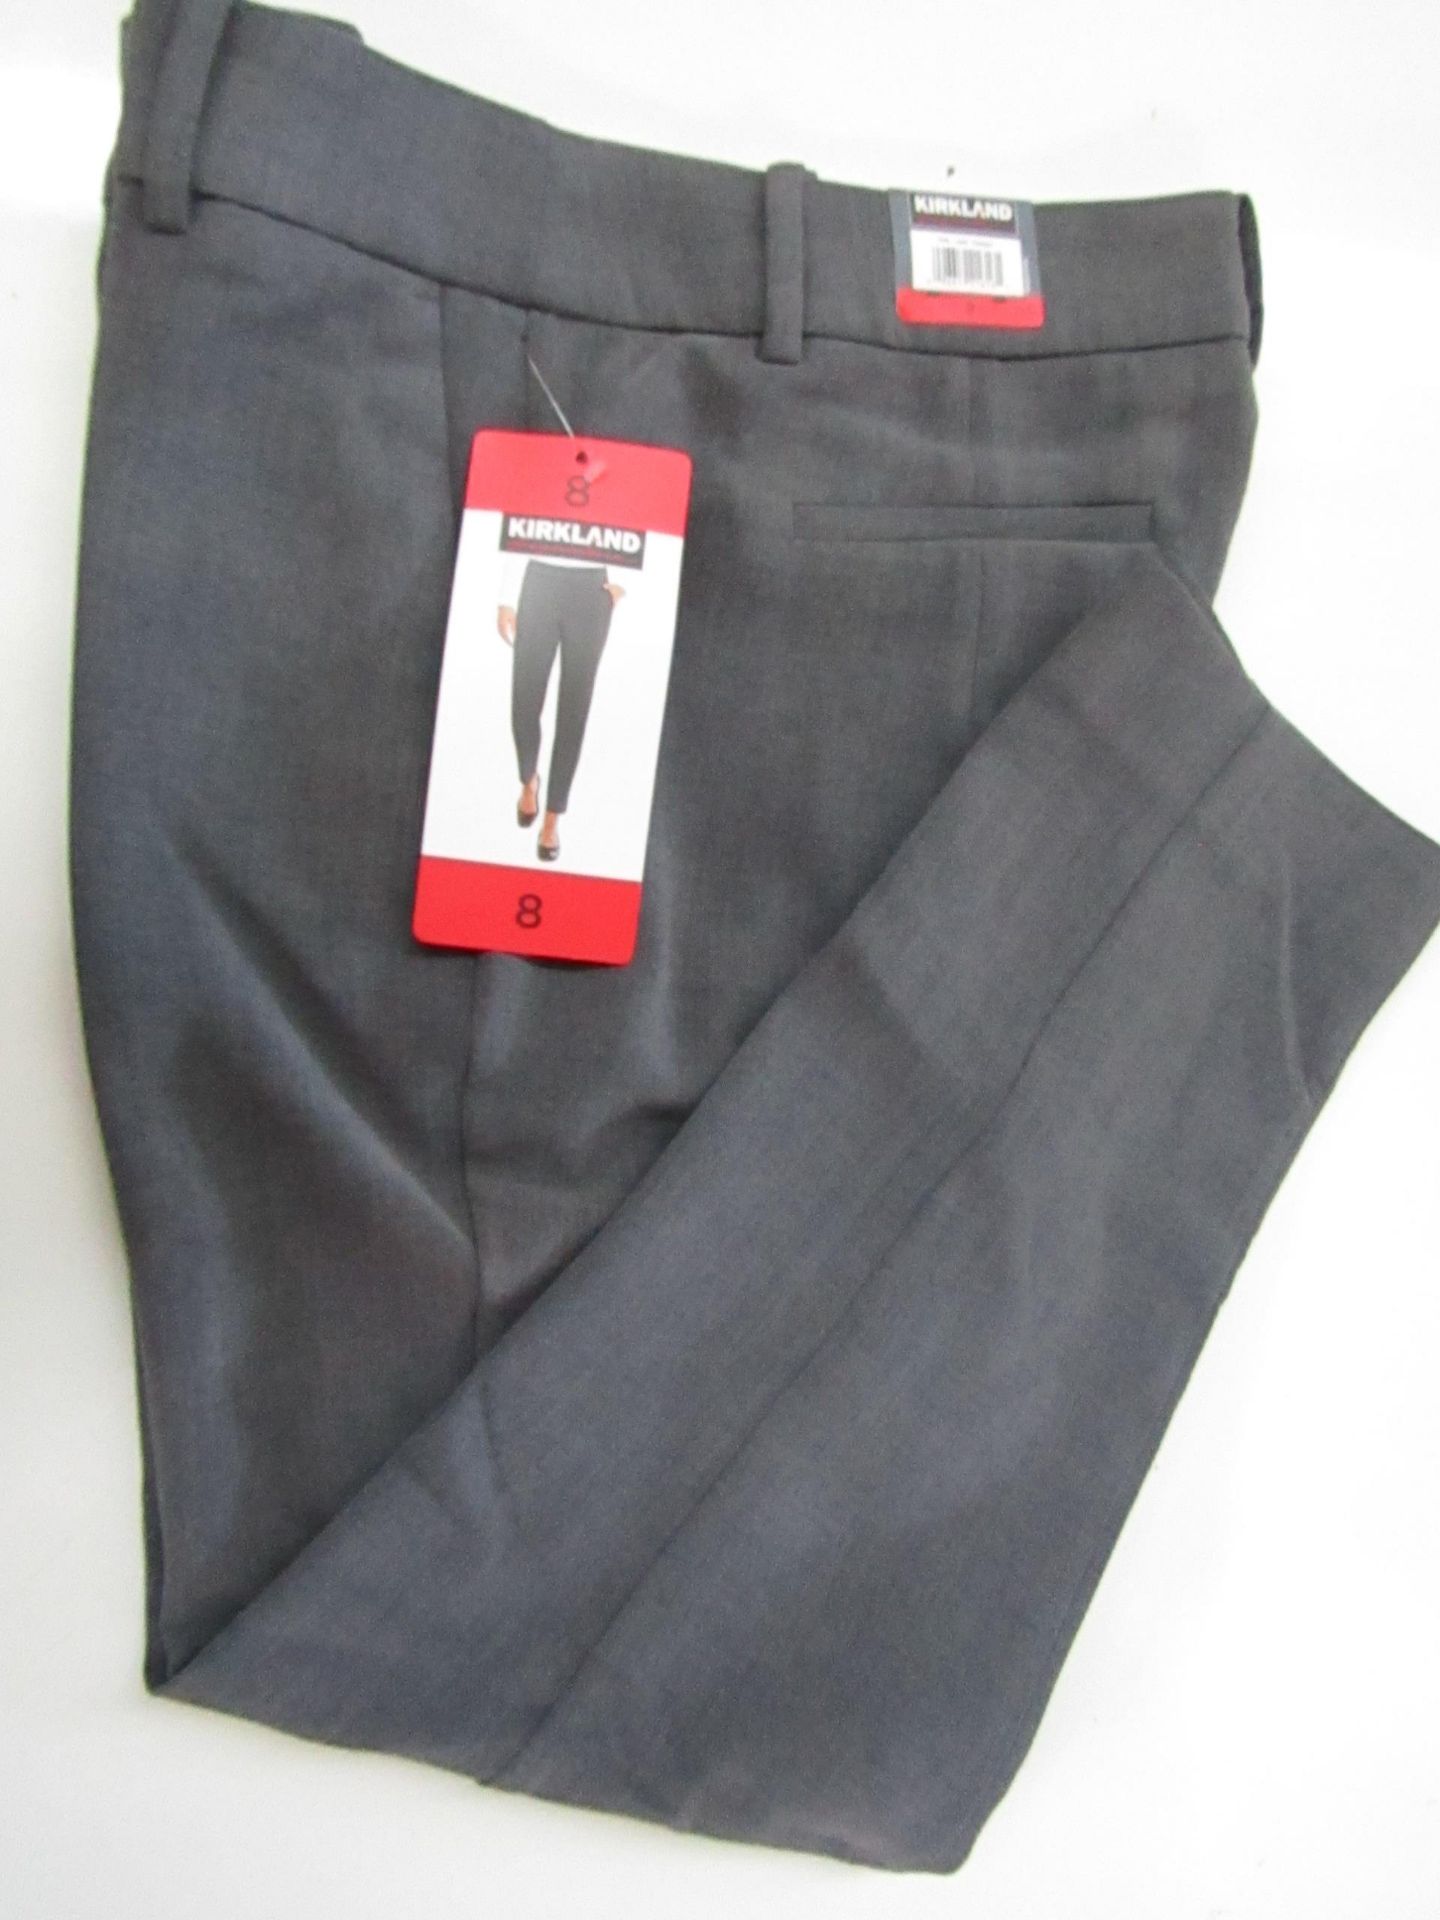 1 X Pair of Kirkland Signature Ladies Pants 27" Inseam Grey Size 8 New With Tags